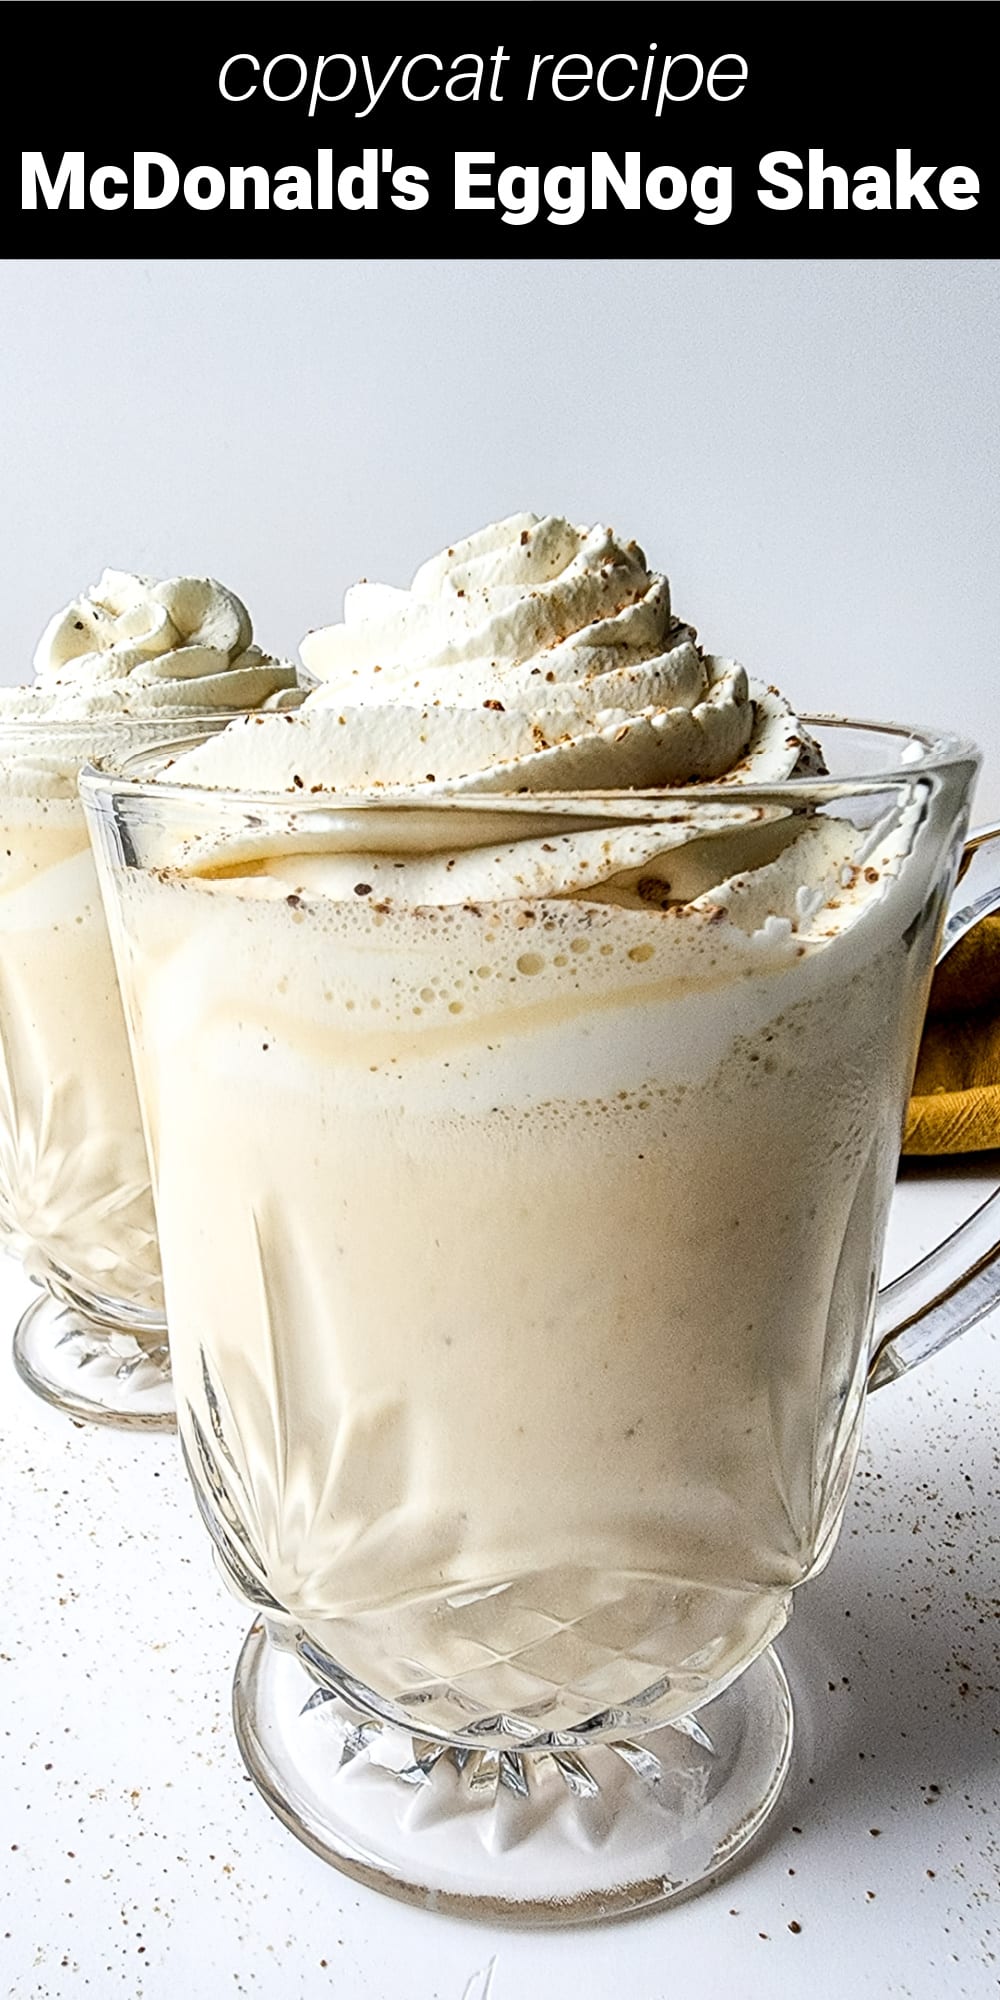 This copycat McDonald’s Eggnog Milkshake is a perfect stand-in for the seasonal treat served for a limited time at McDonald’s. It’s creamy and delicious, full of holiday eggnog flavor with a hint of nutmeg, and it’s the perfect sweet treat to welcome the holiday season.